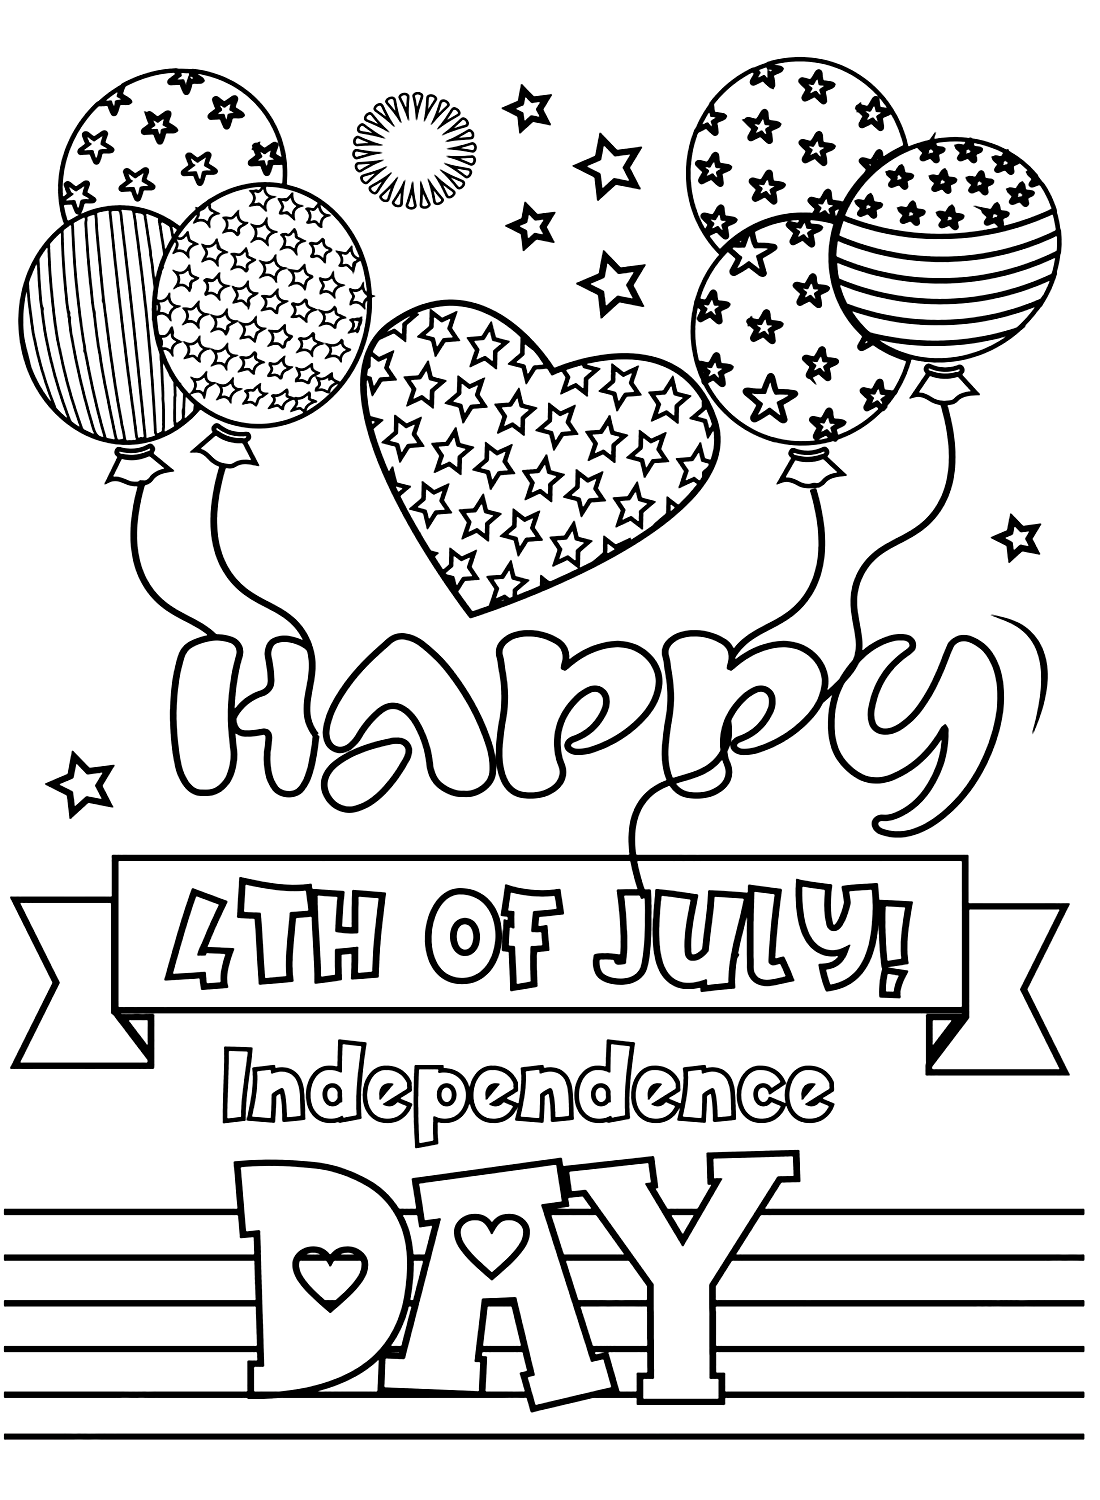 Happy 4th of July Independence Day Coloring Pages - Free Printable Coloring Pages